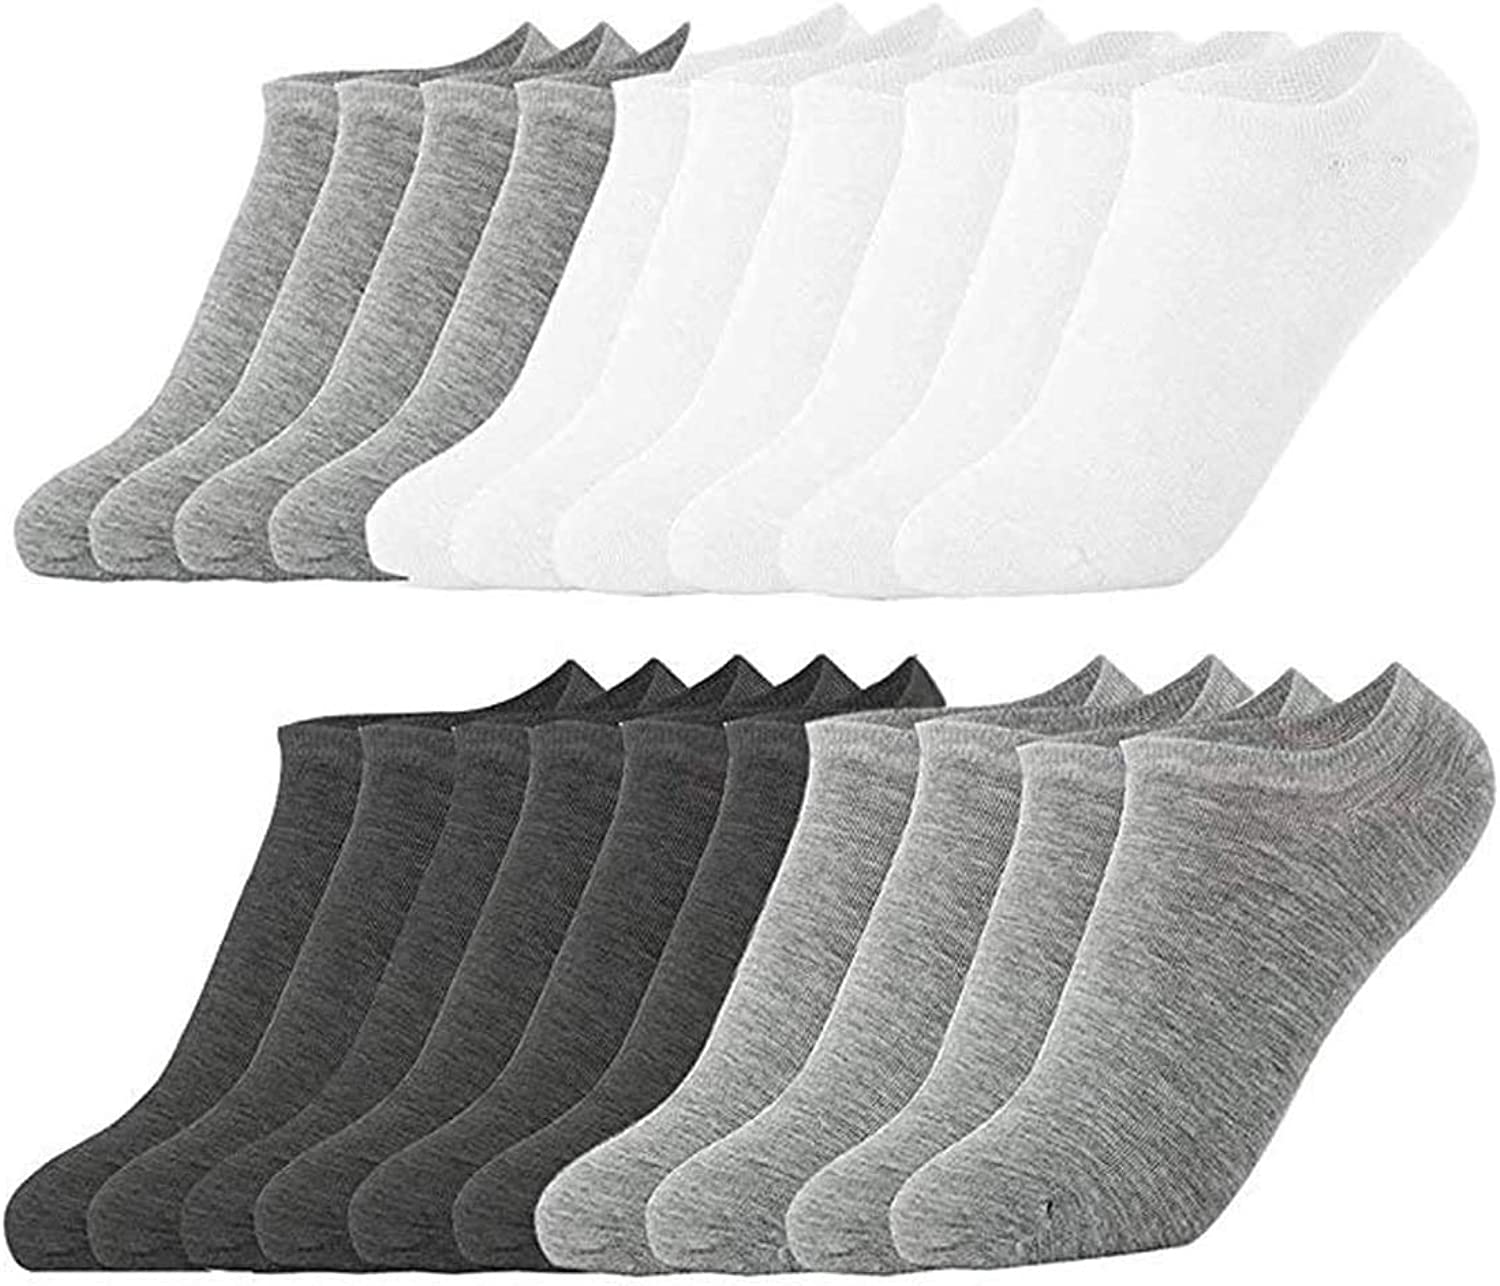 Light up in the Dark 10 Pairs Ankle Socks No Show Sock Low-Cut Athletic Men Women Cotton Socks